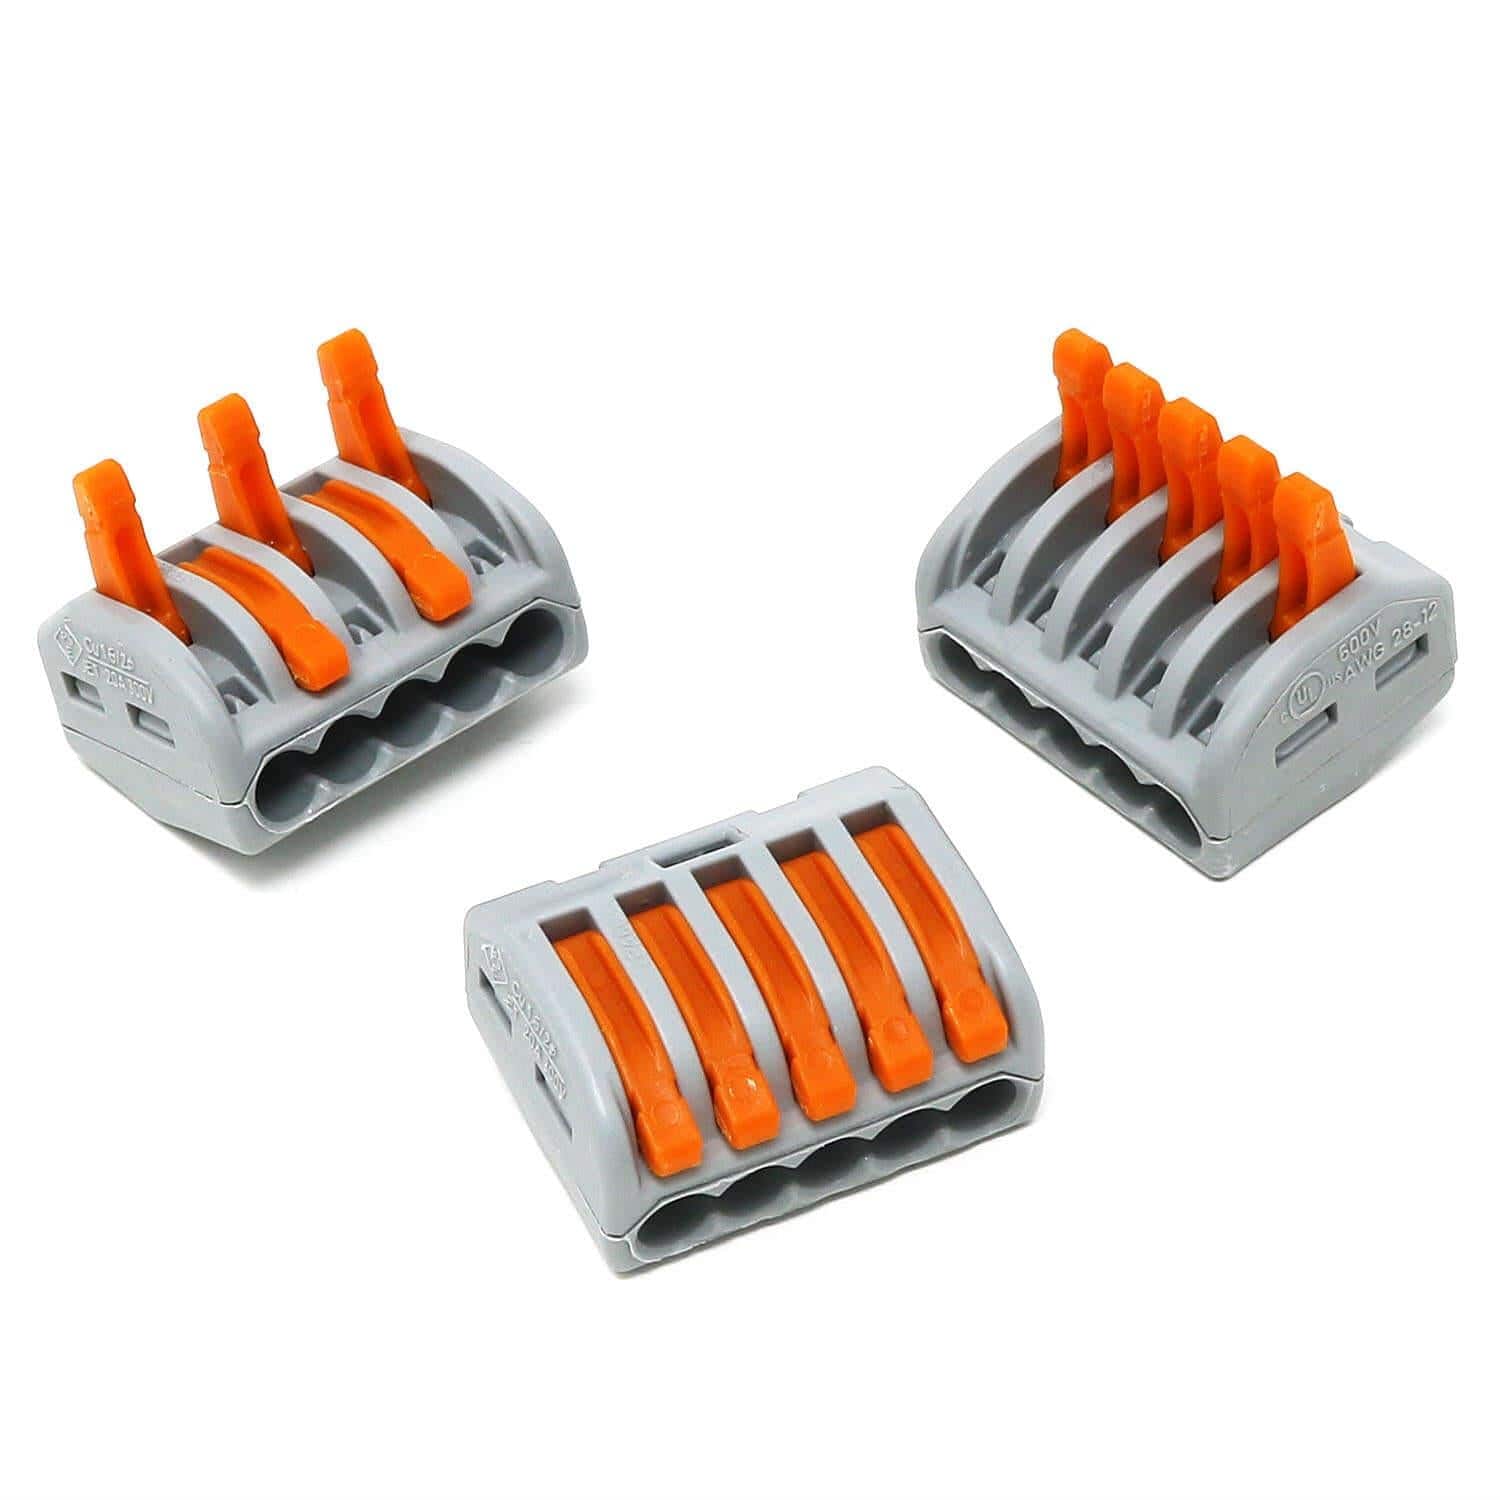 Wago 5-Way Lever Connector (12-28 AWG) - Pack of 3 - The Pi Hut